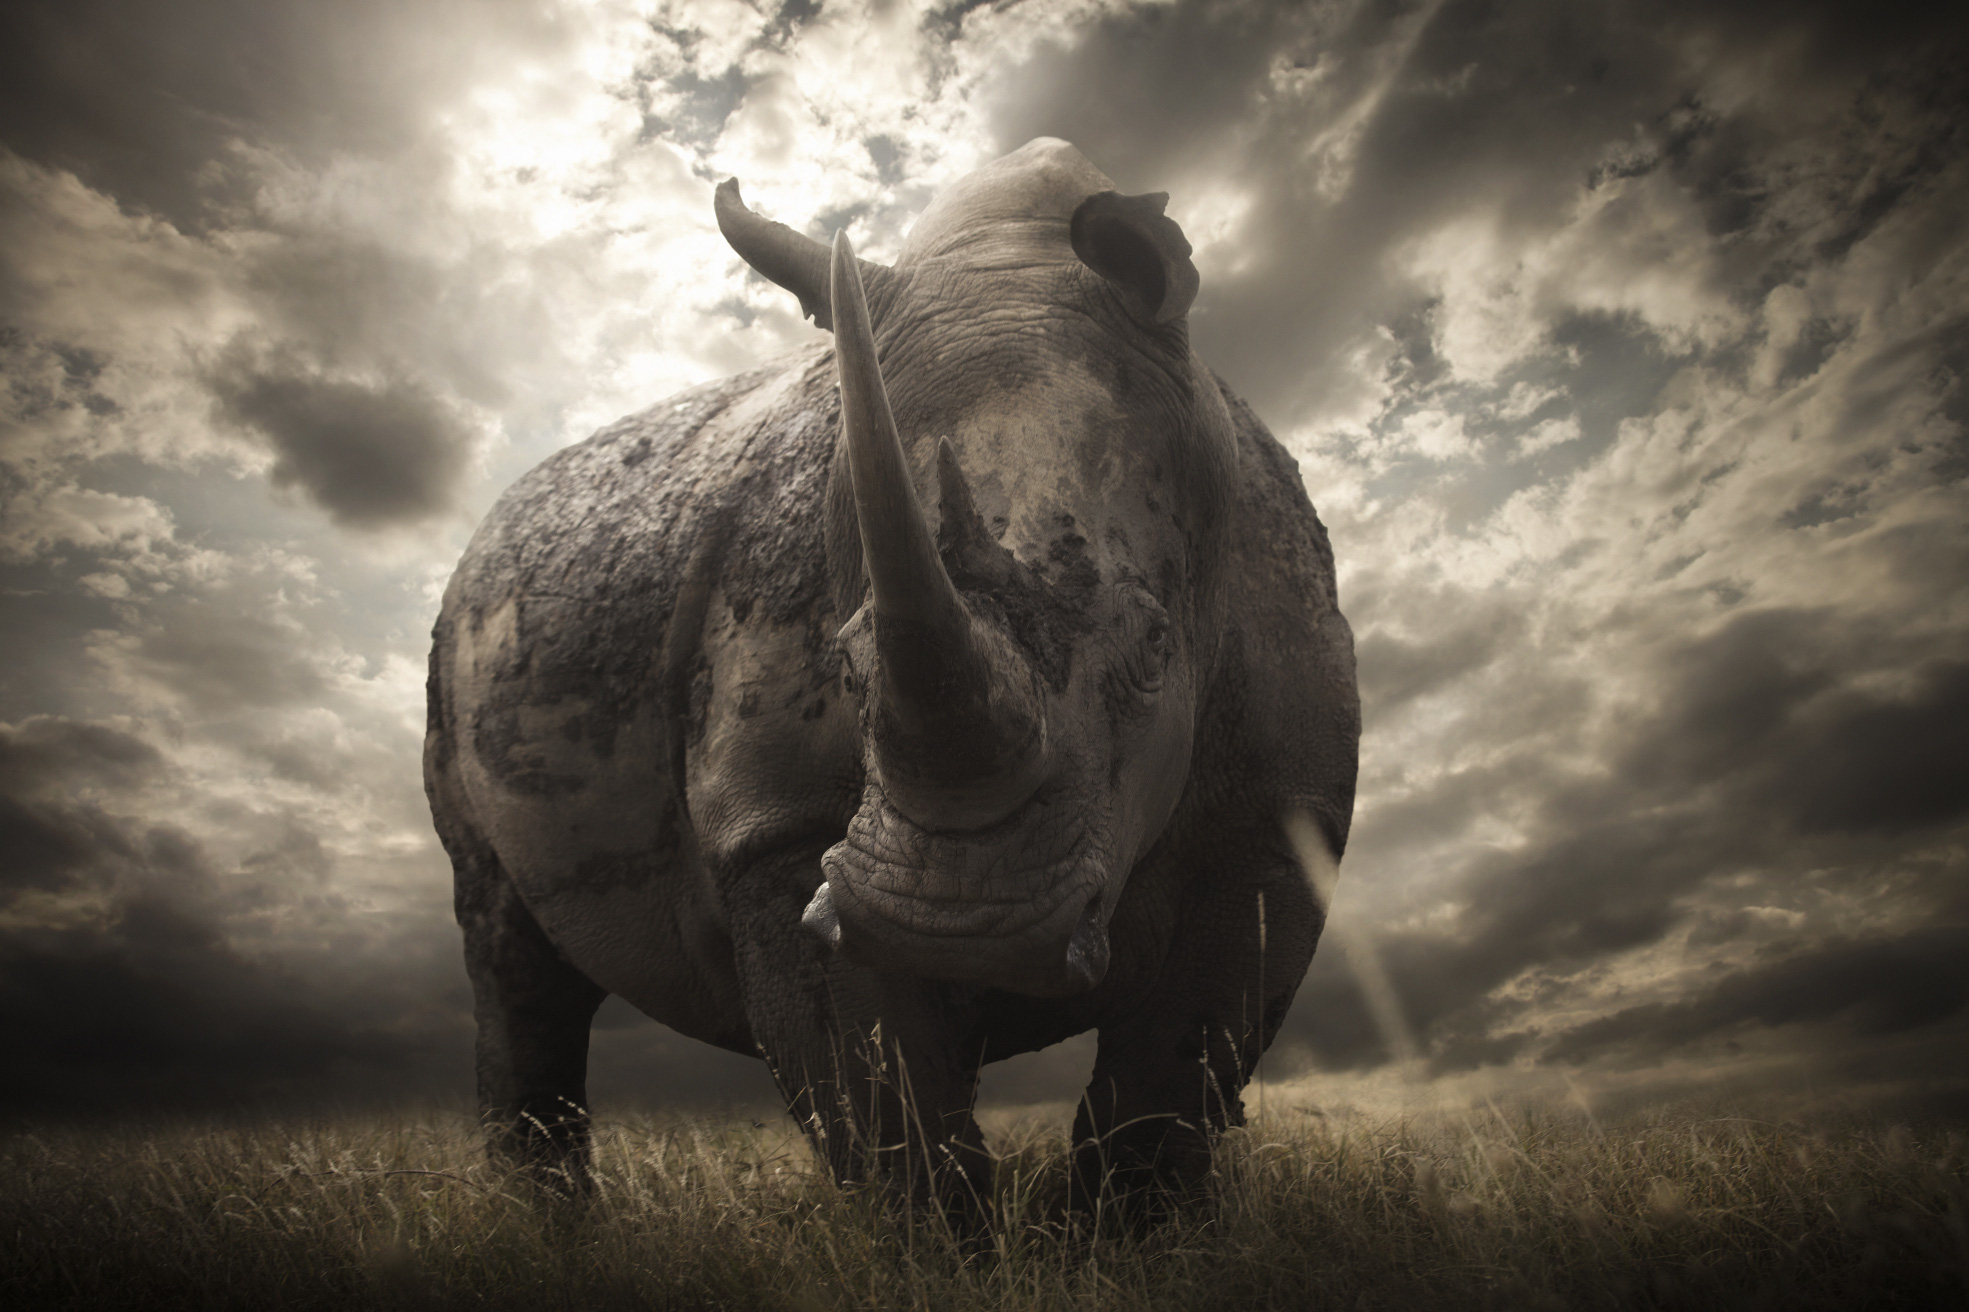 A rhino in Africa. Photo: Bjorn Persson